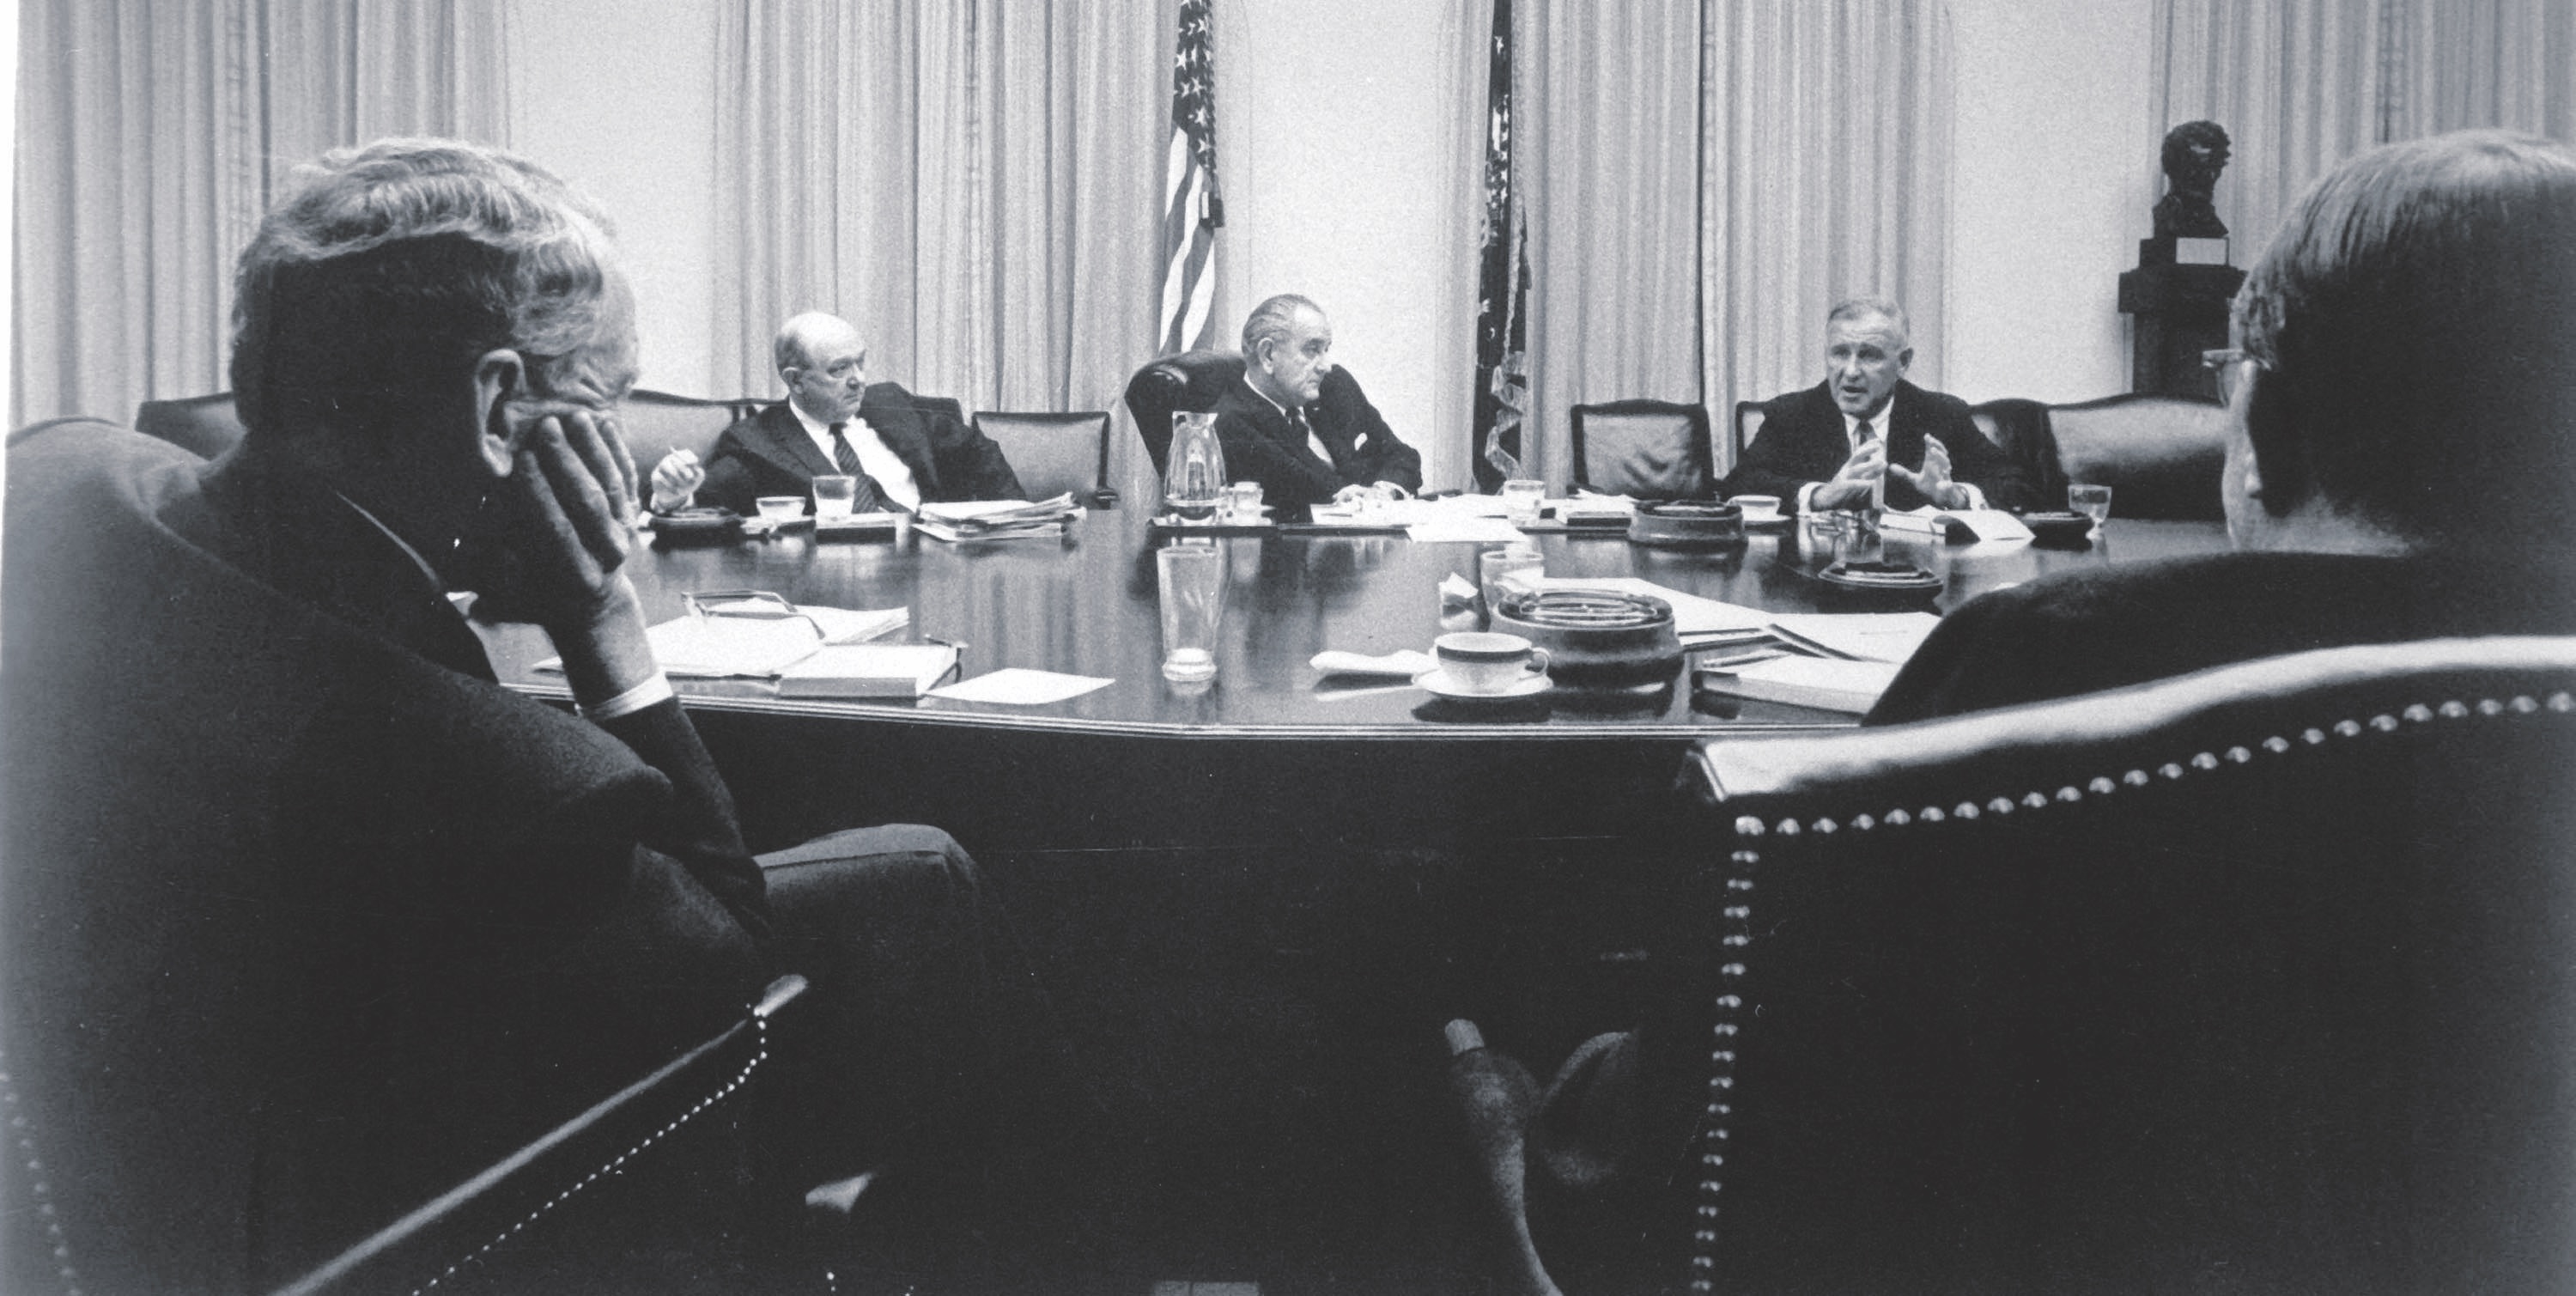 Lyndon B. Johnson and his advisers meet on Oct. 29, 1968, to review the situation in Vietnam. Johnson said in a 1965 speech that the United States had pledged to help South Vietnam defend its independence, “and I intend to keep our promise.” (American Photo Archive/Alamy)